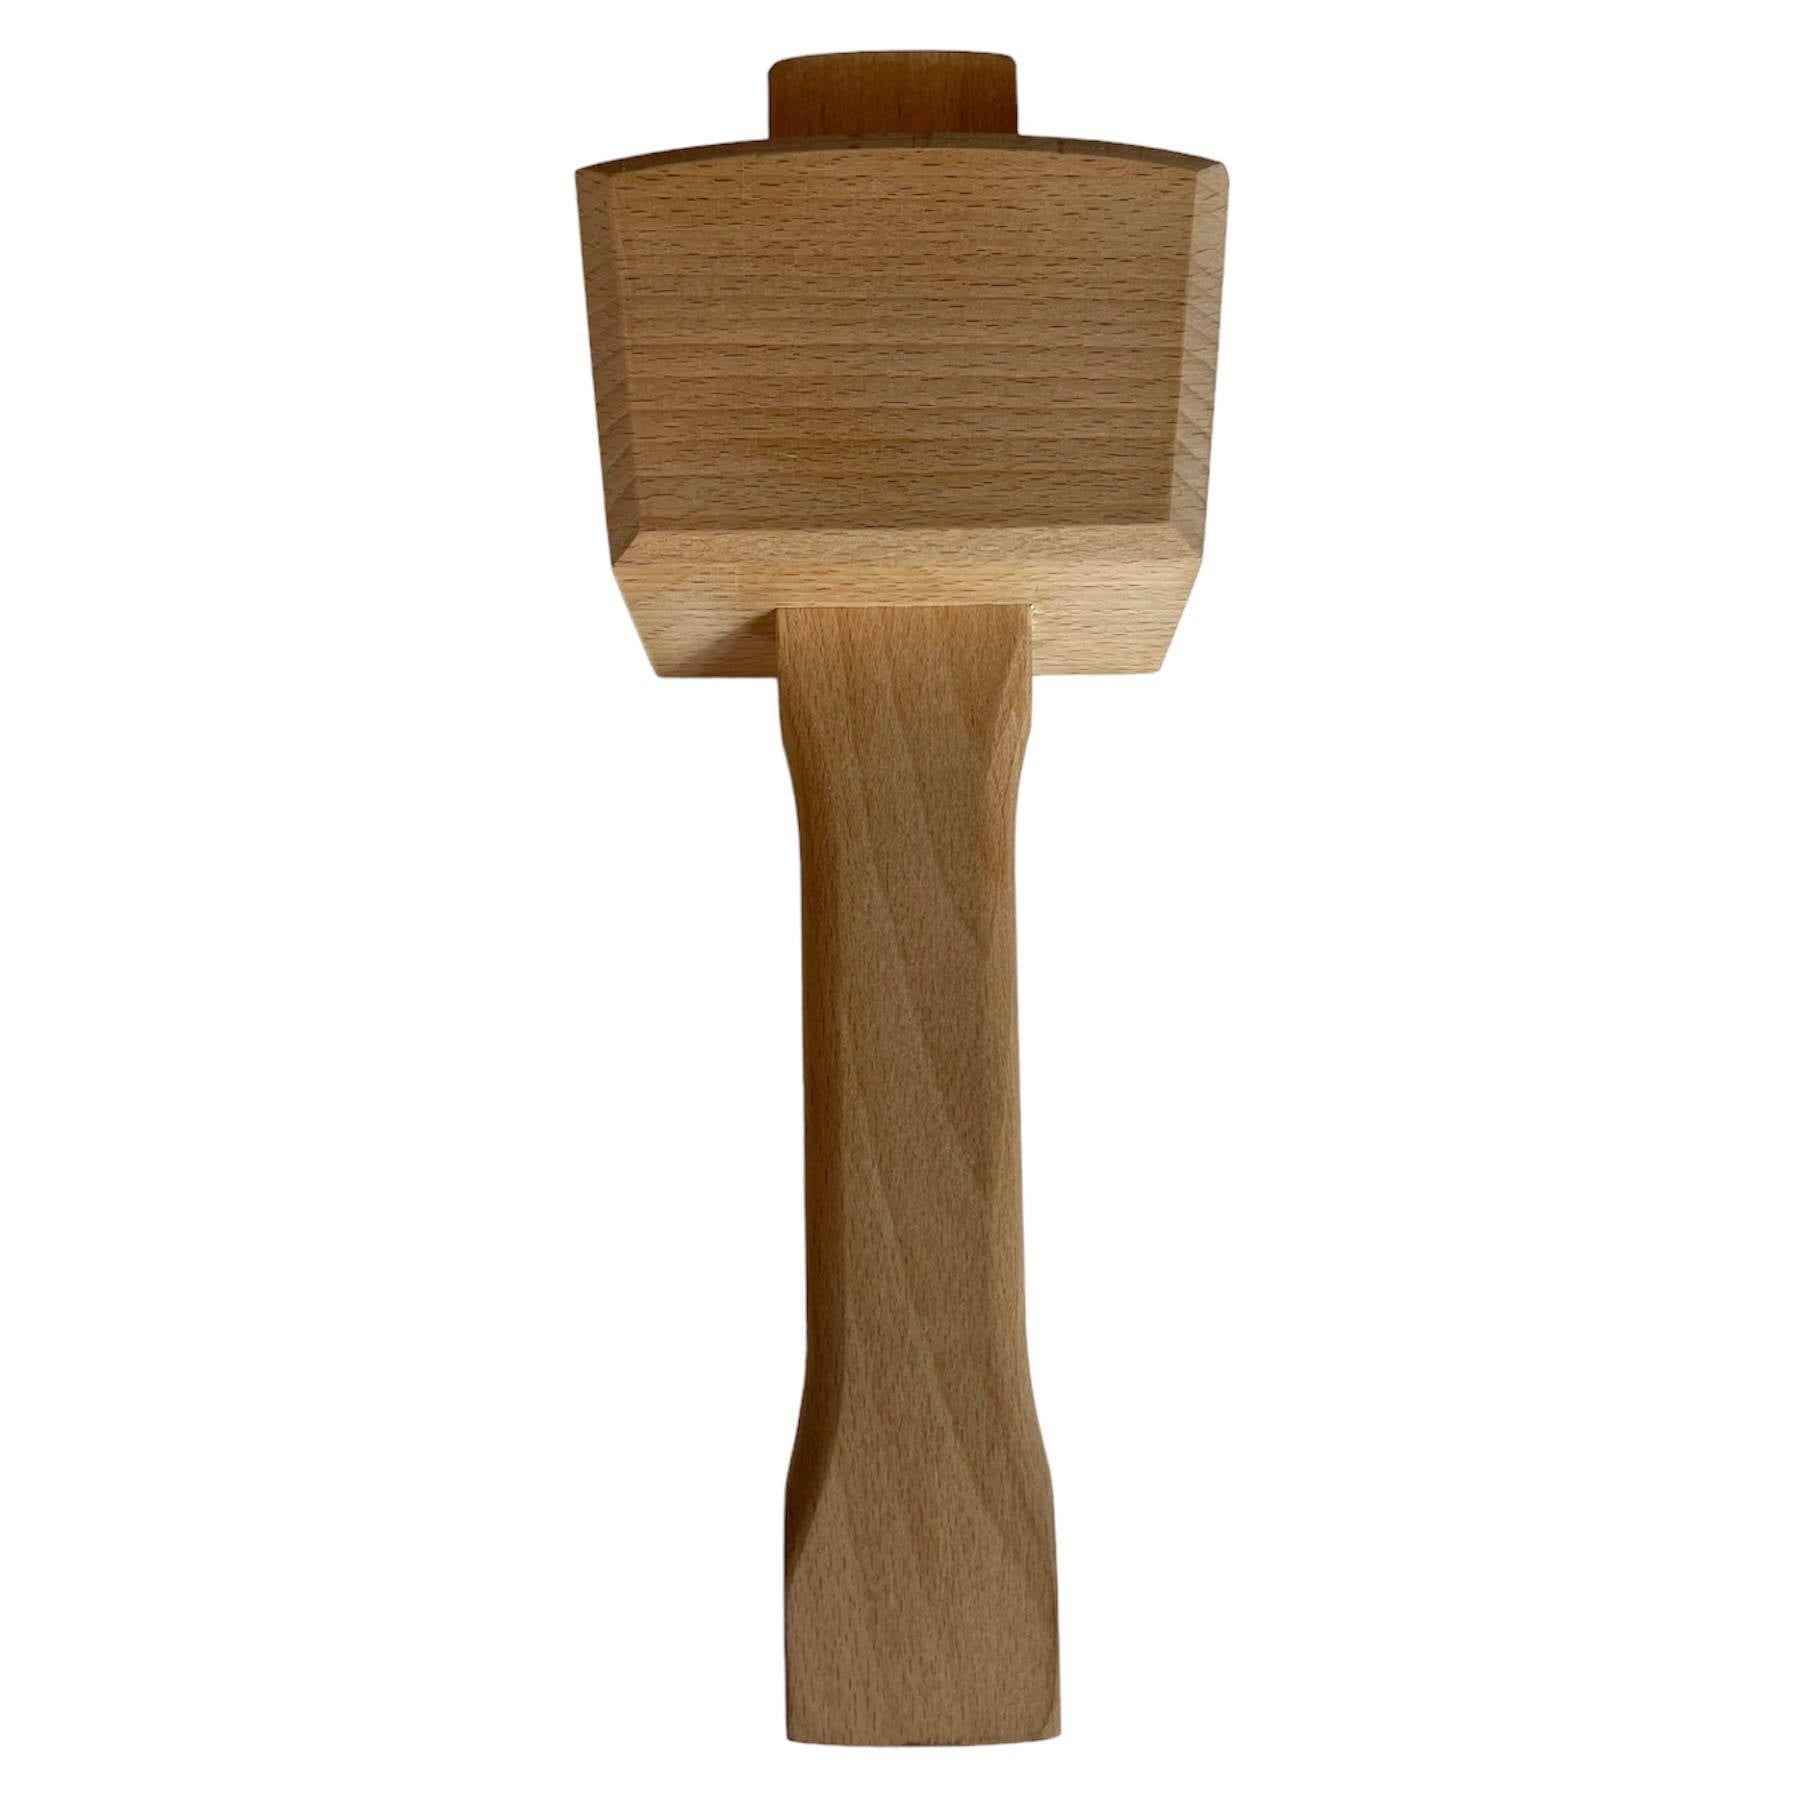 Carpenters Rectangular Wood Mallet 75mm (3") 260400 by Soba